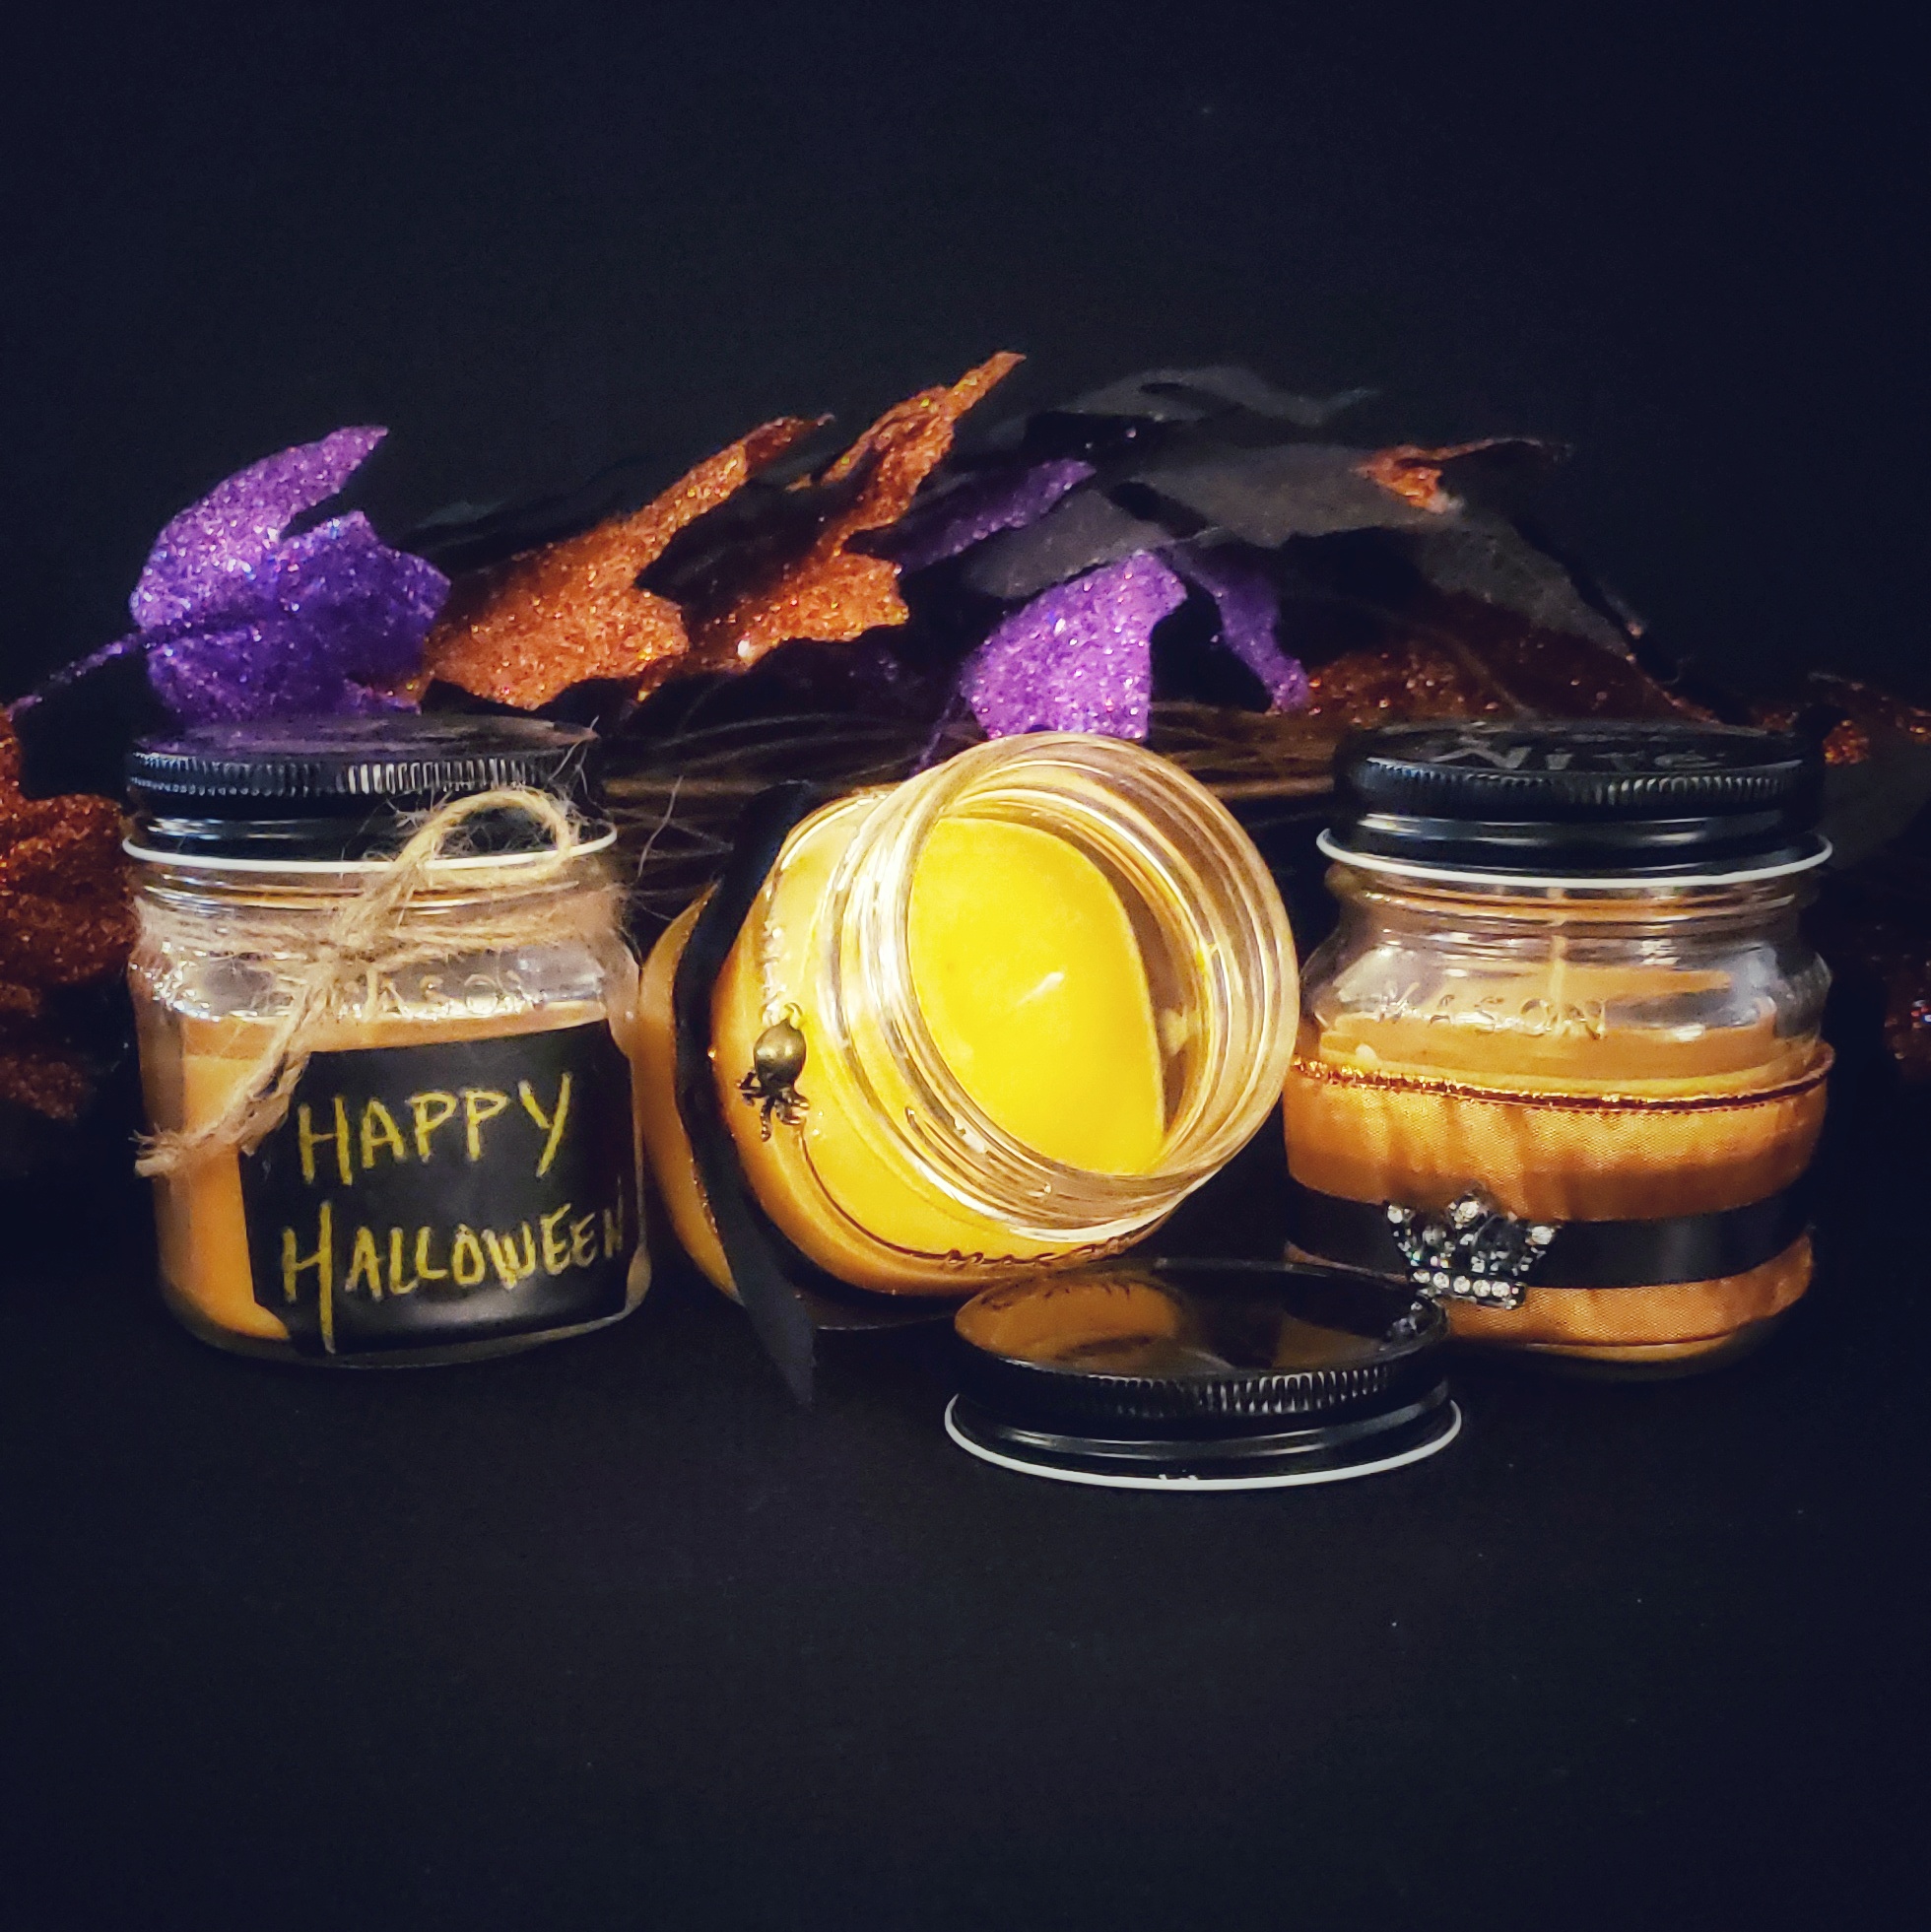 A Halloween Candles I candle maker project by Yaymaker